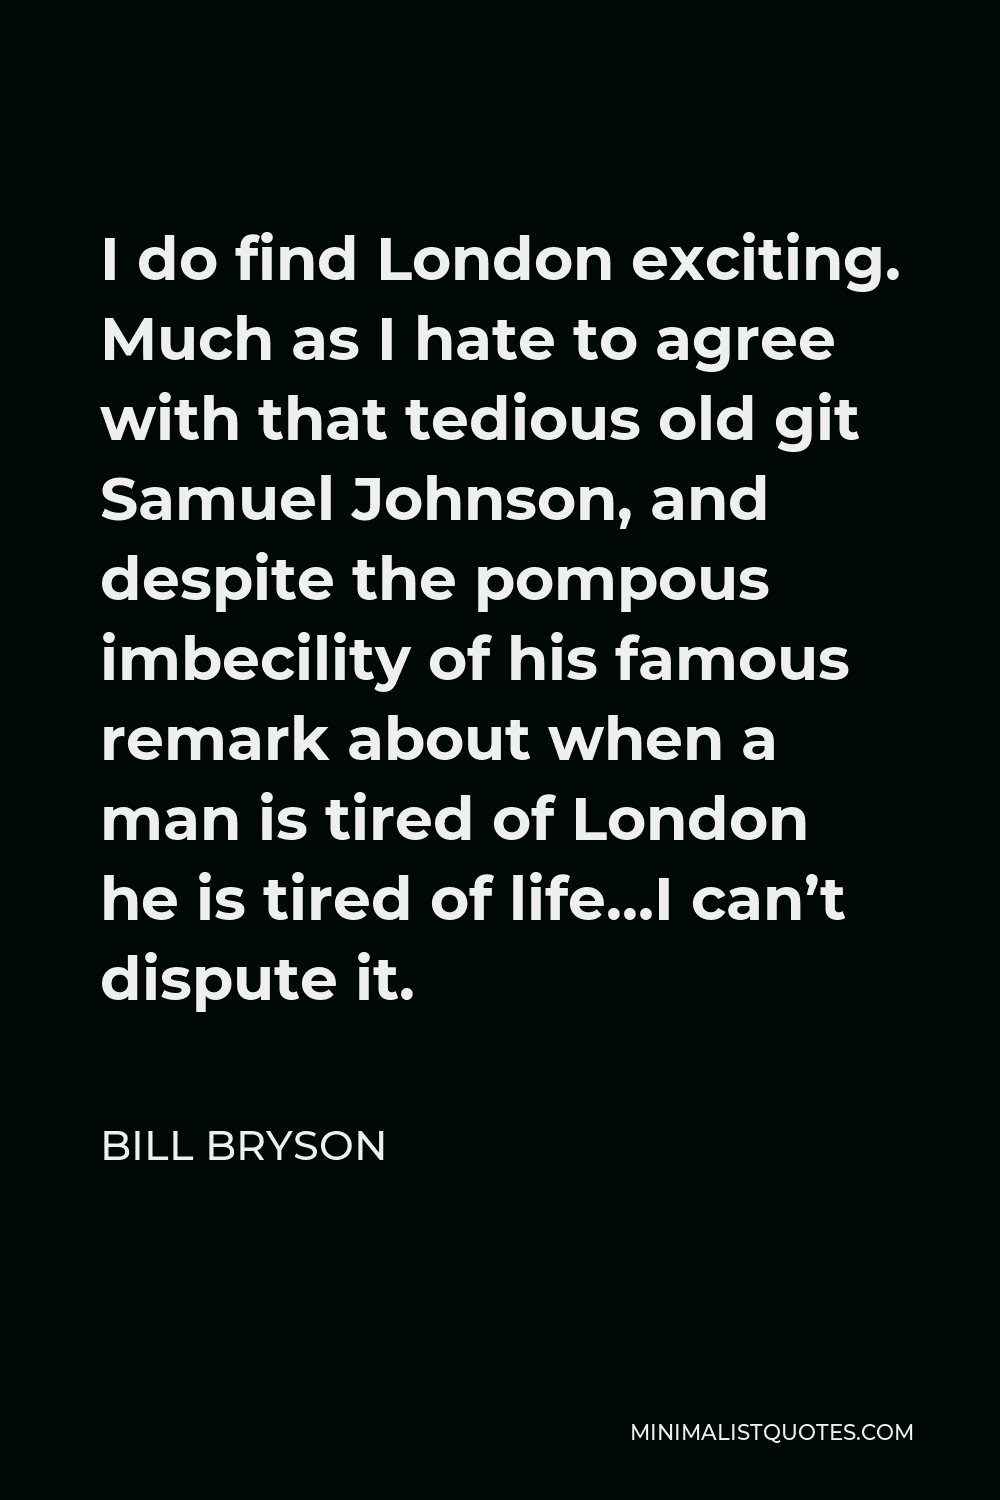 Bill Bryson Quote - I do find London exciting. Much as I hate to agree with that tedious old git Samuel Johnson, and despite the pompous imbecility of his famous remark about when a man is tired of London he is tired of life…I can’t dispute it.